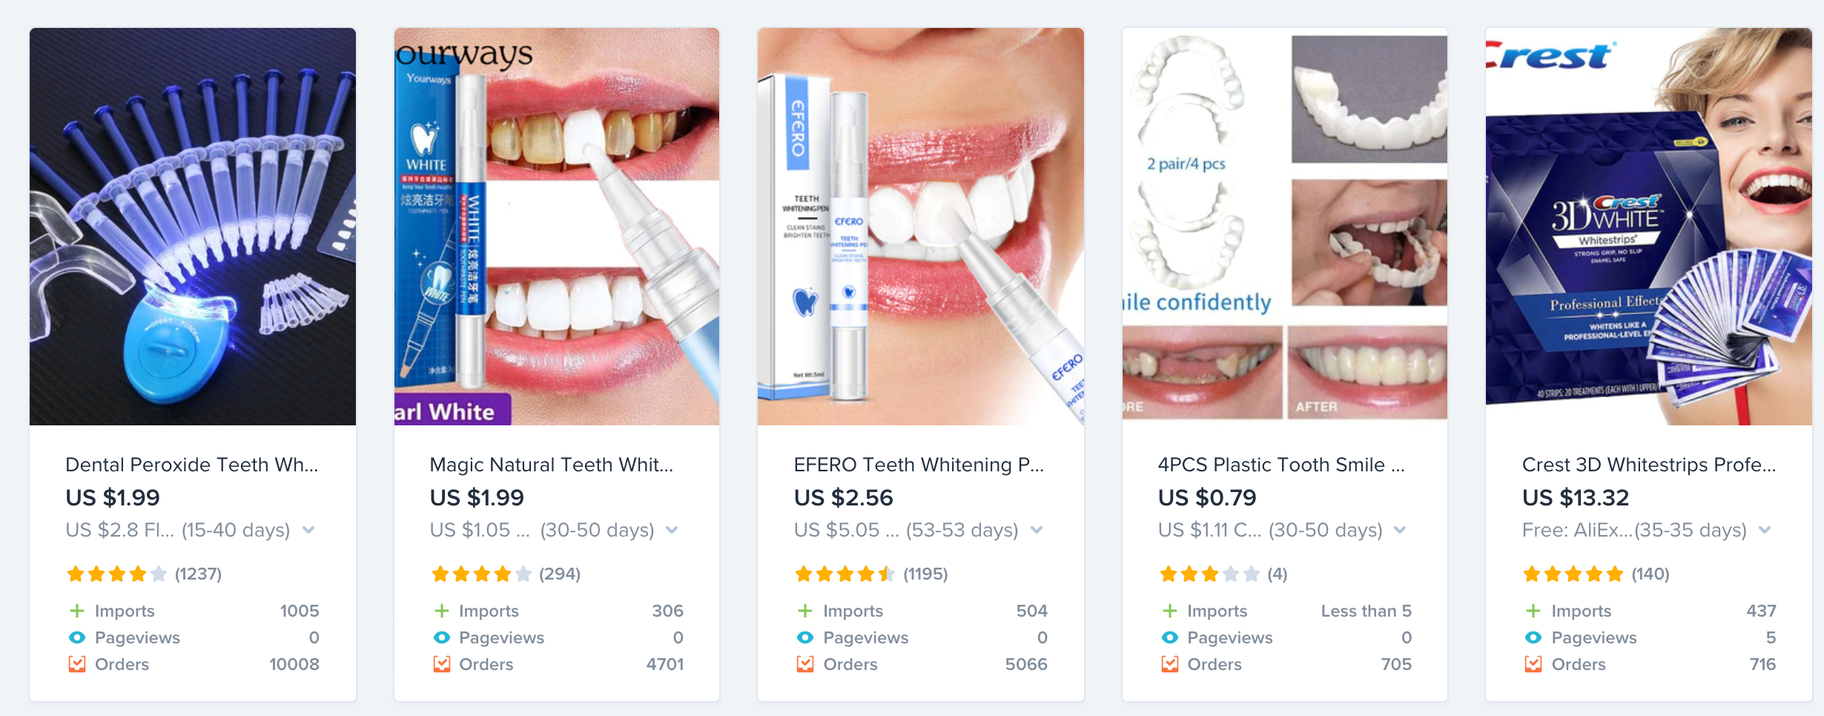 teeth whitening oberlo products